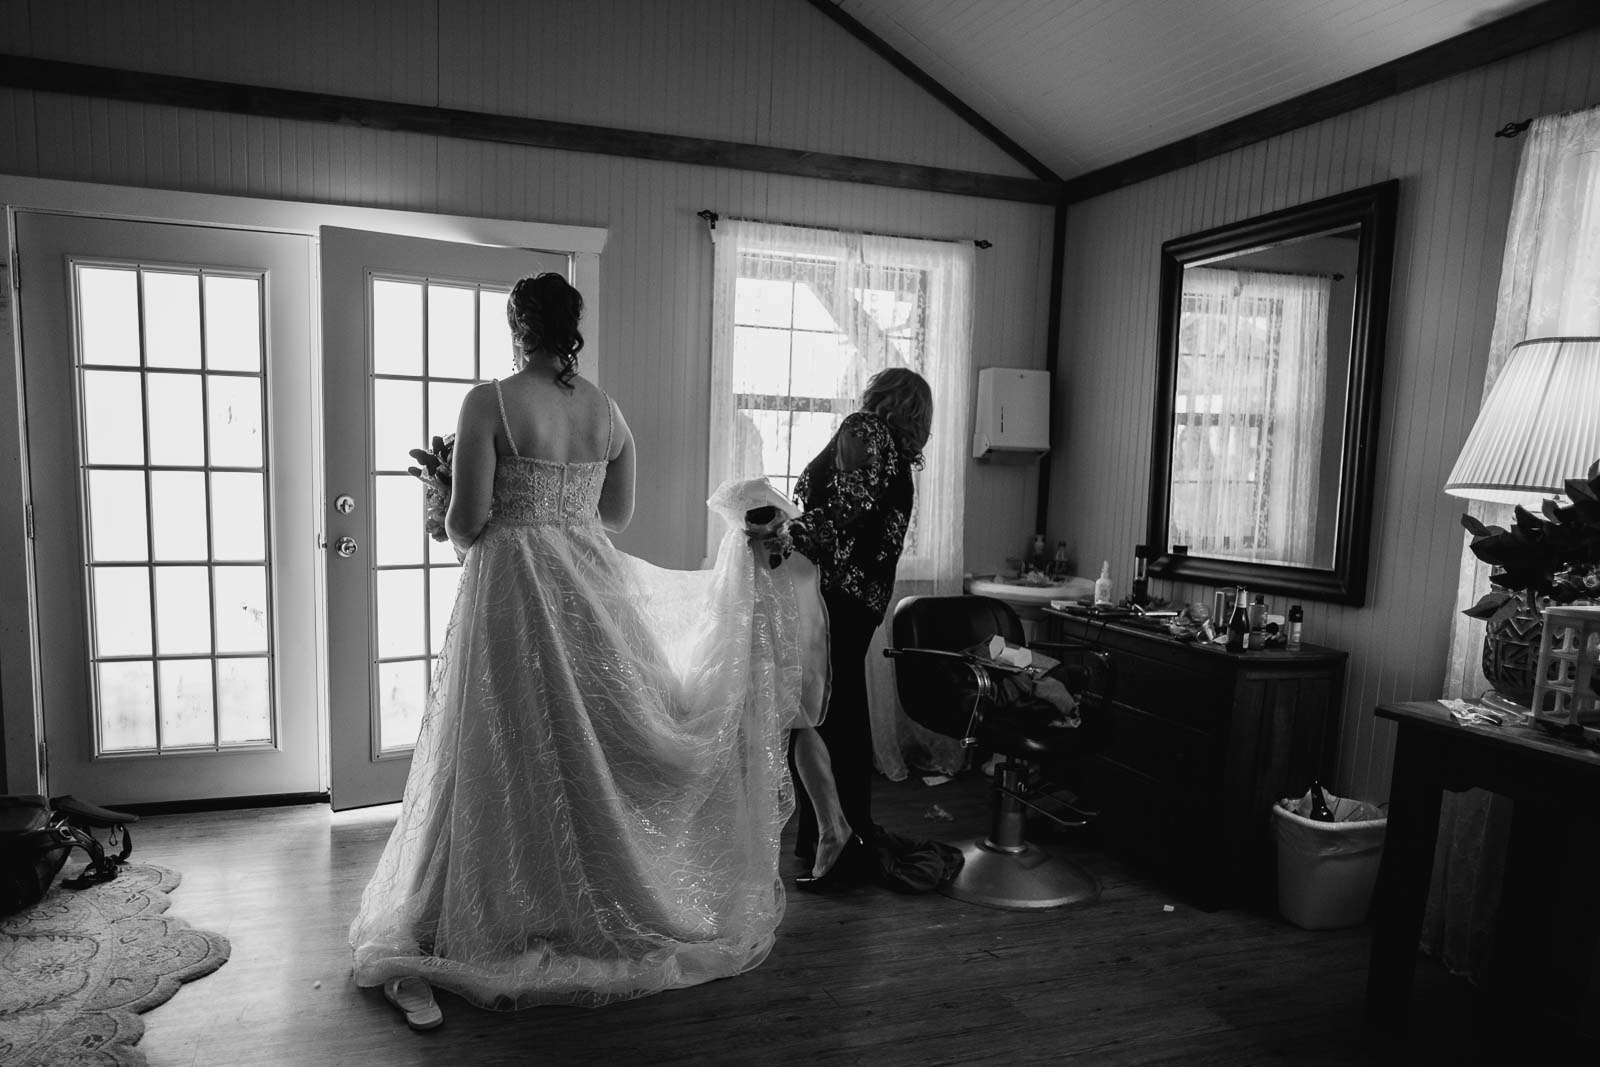 Moments before that in ceremony in the dressing room the bride stands ready to exit as her mother passed through the window